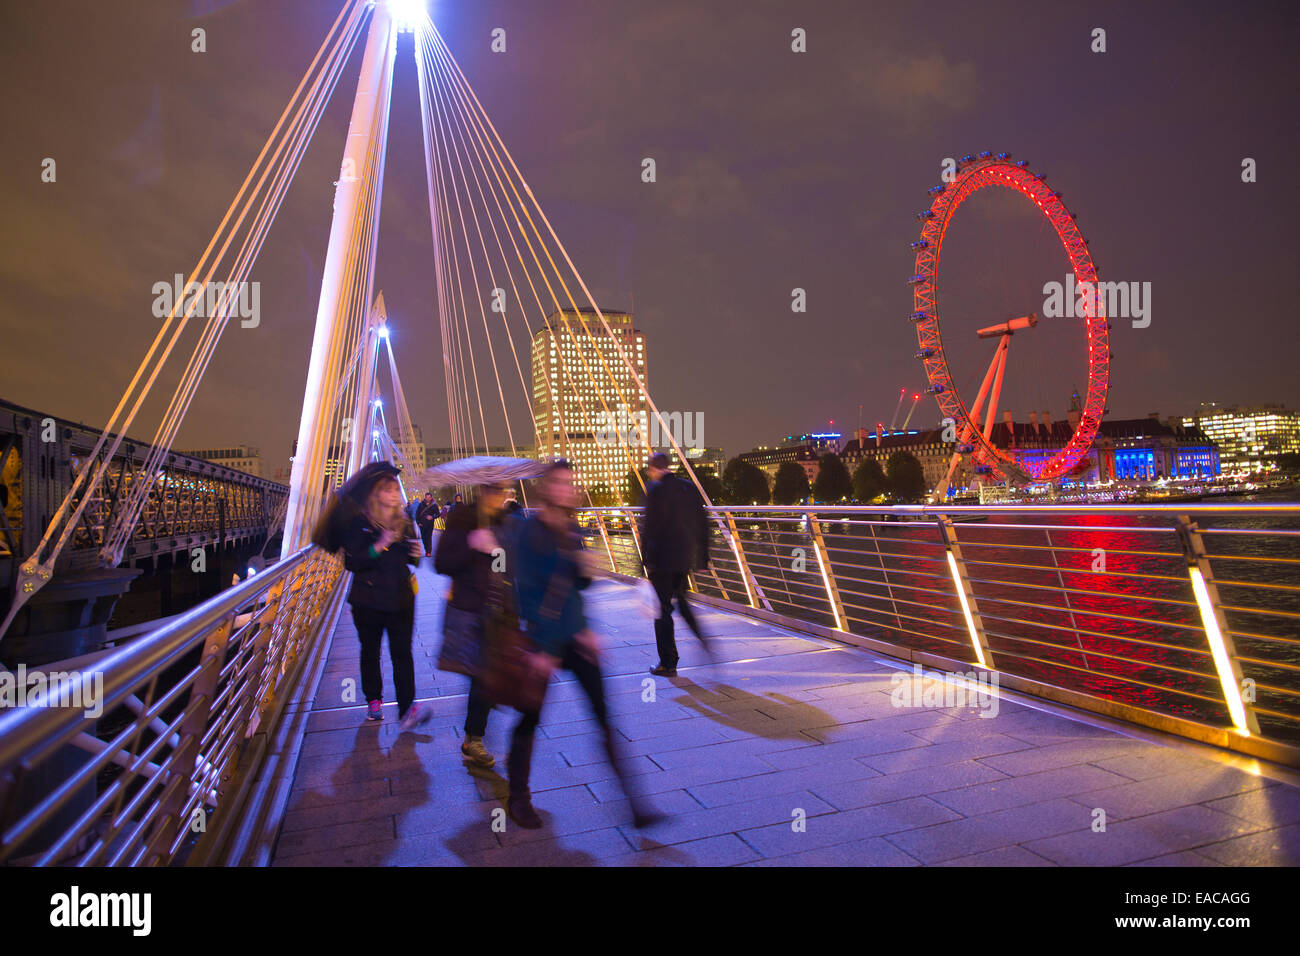 Illuminated Golden Jubilee Bridges run across the River Thames in London with the London Eye illuminated in red in the distance. Stock Photo